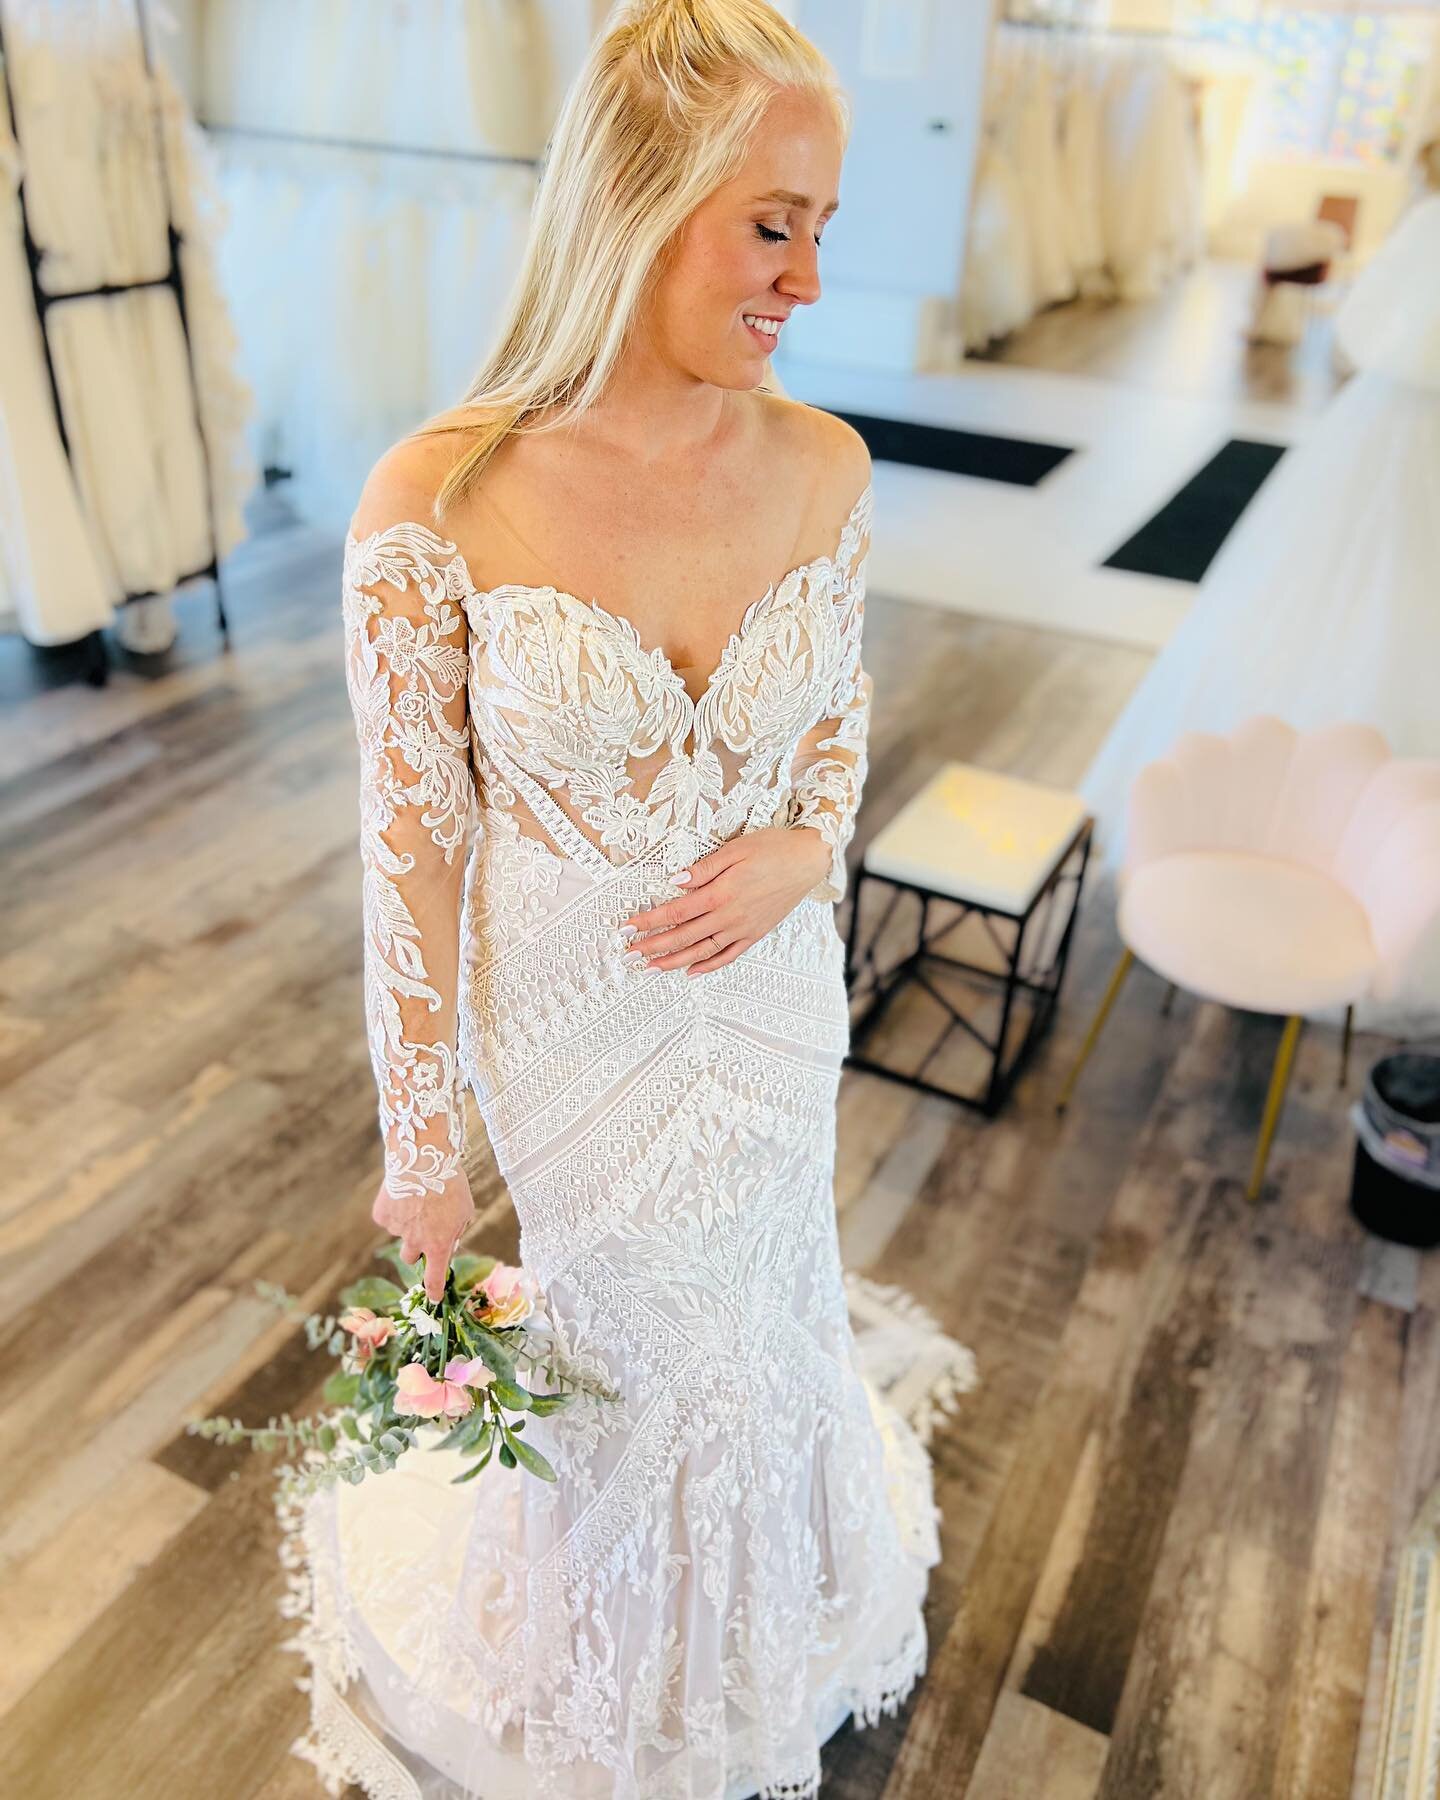 an effortless look for the free-spirited boho bride

✨Kelee by All Who Wander 
.
.
.

#weddingplanning #weddingdress #allwhowander #allwhowanderbridal #bridetobe #hctbride #boho #bohobride #bohowedding #bohoweddingdress #freespiritedbrides 
#herecome